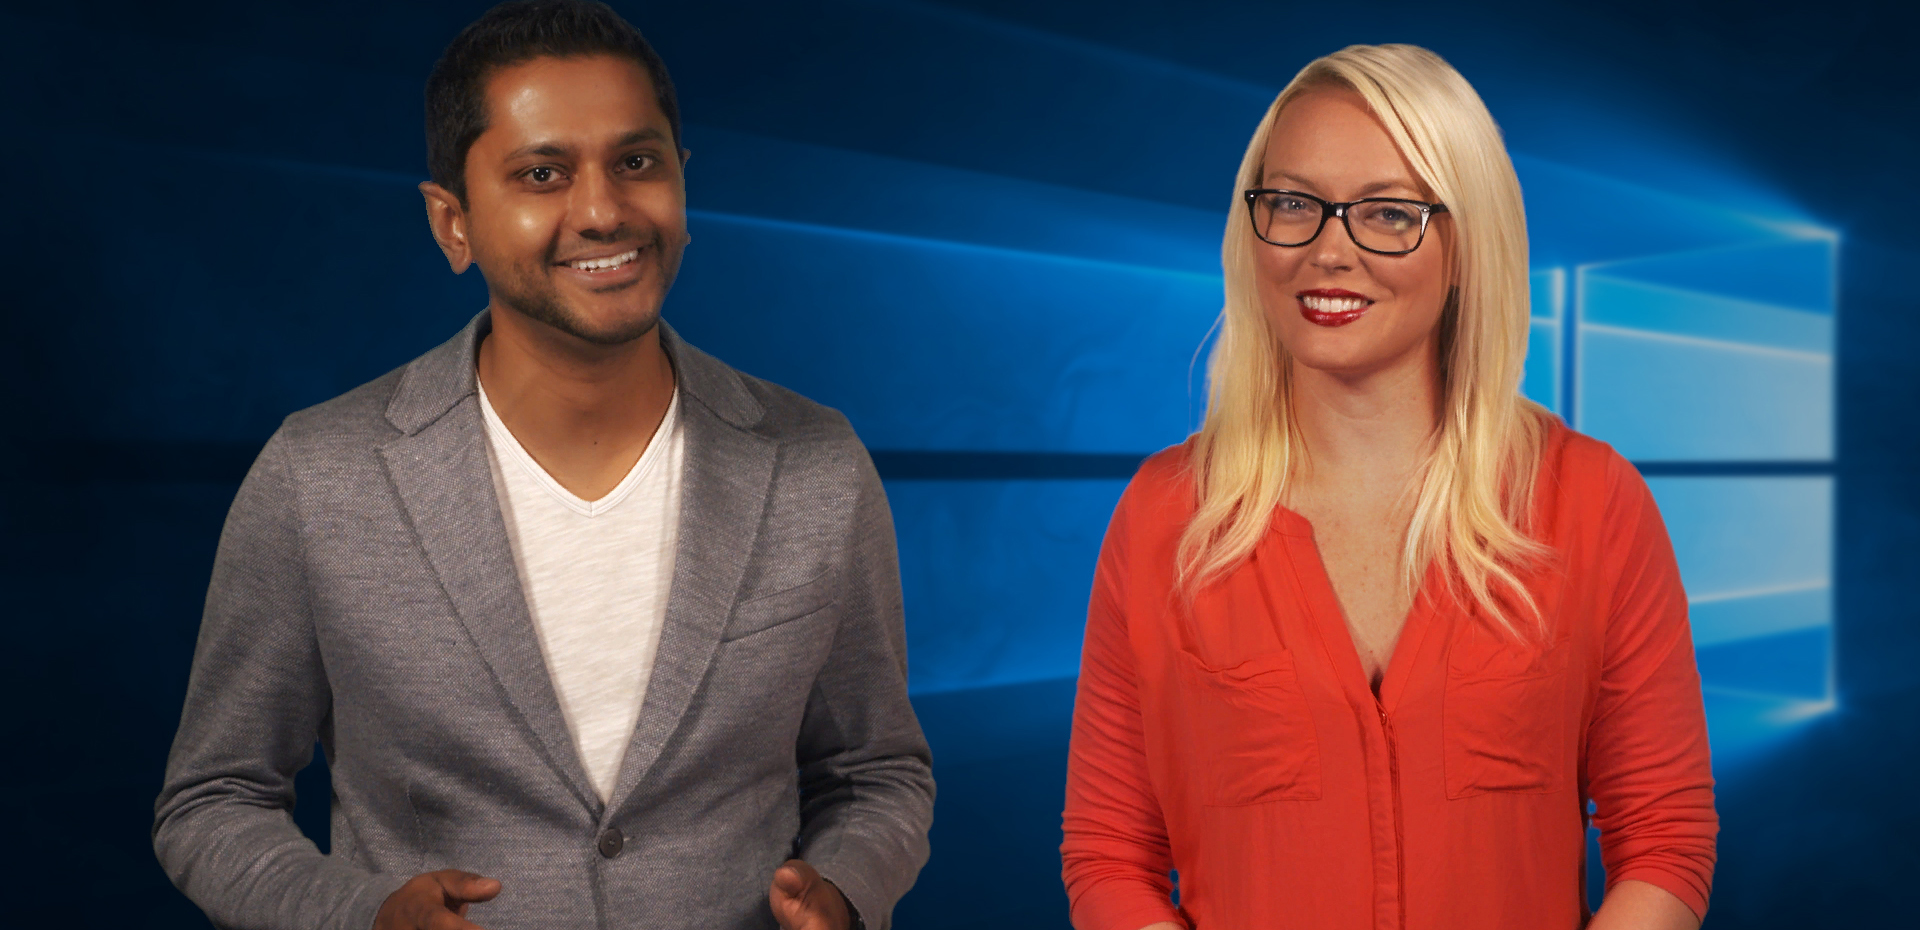 This Week on Windows: Cortana tips, Windows 10 PC offers and more